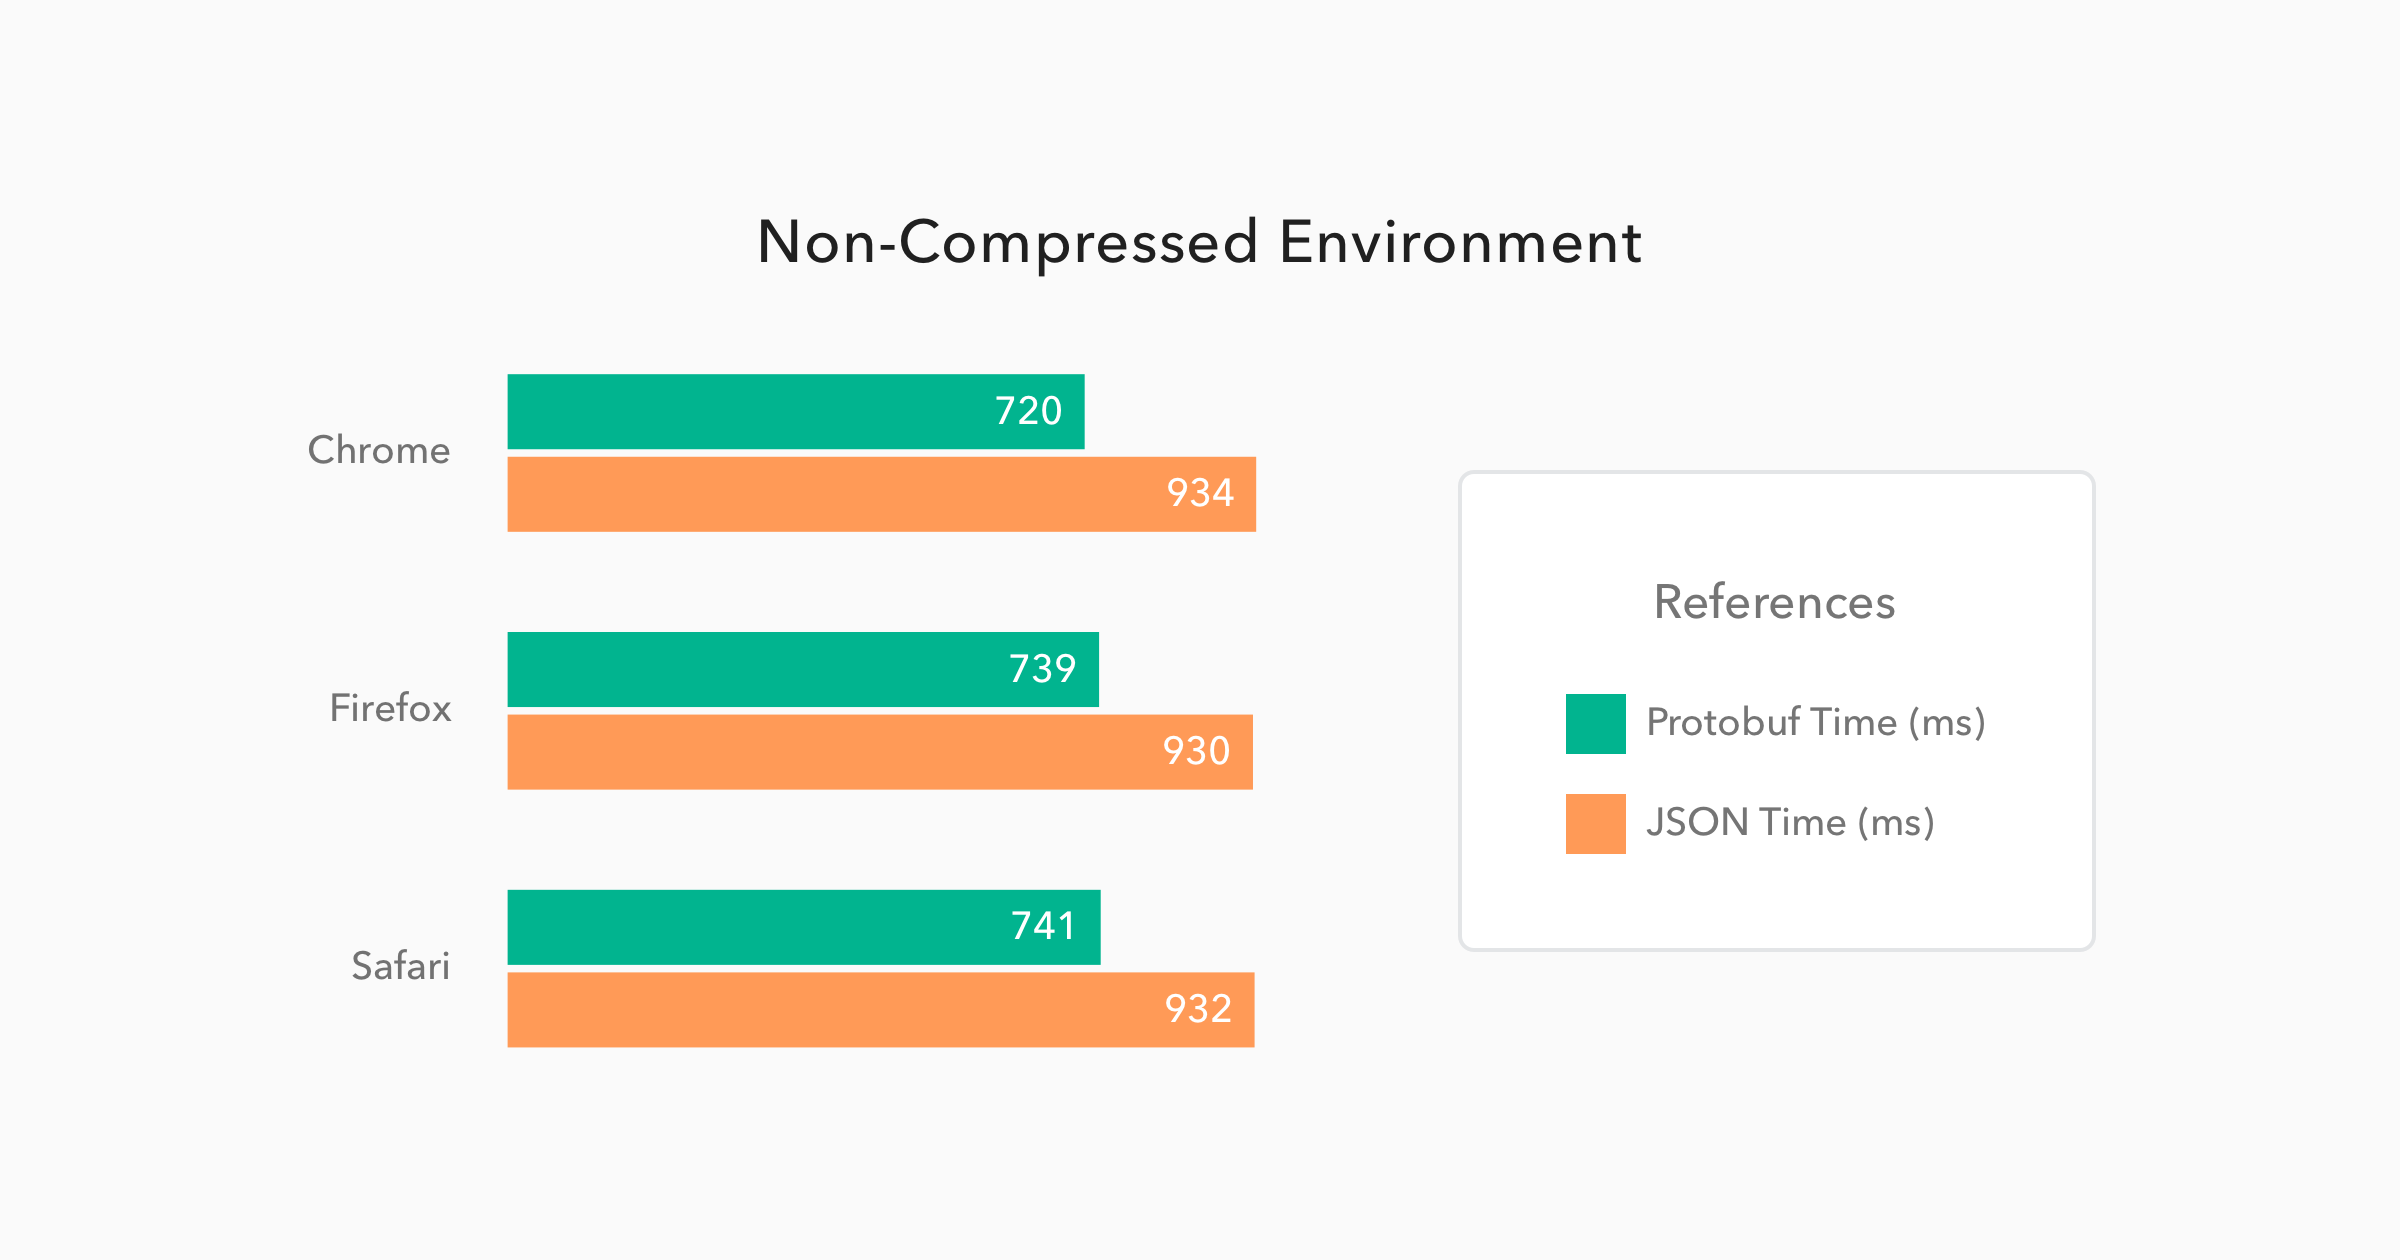 Comparison of Protobuf/JSON performance on non-compressed GET requests